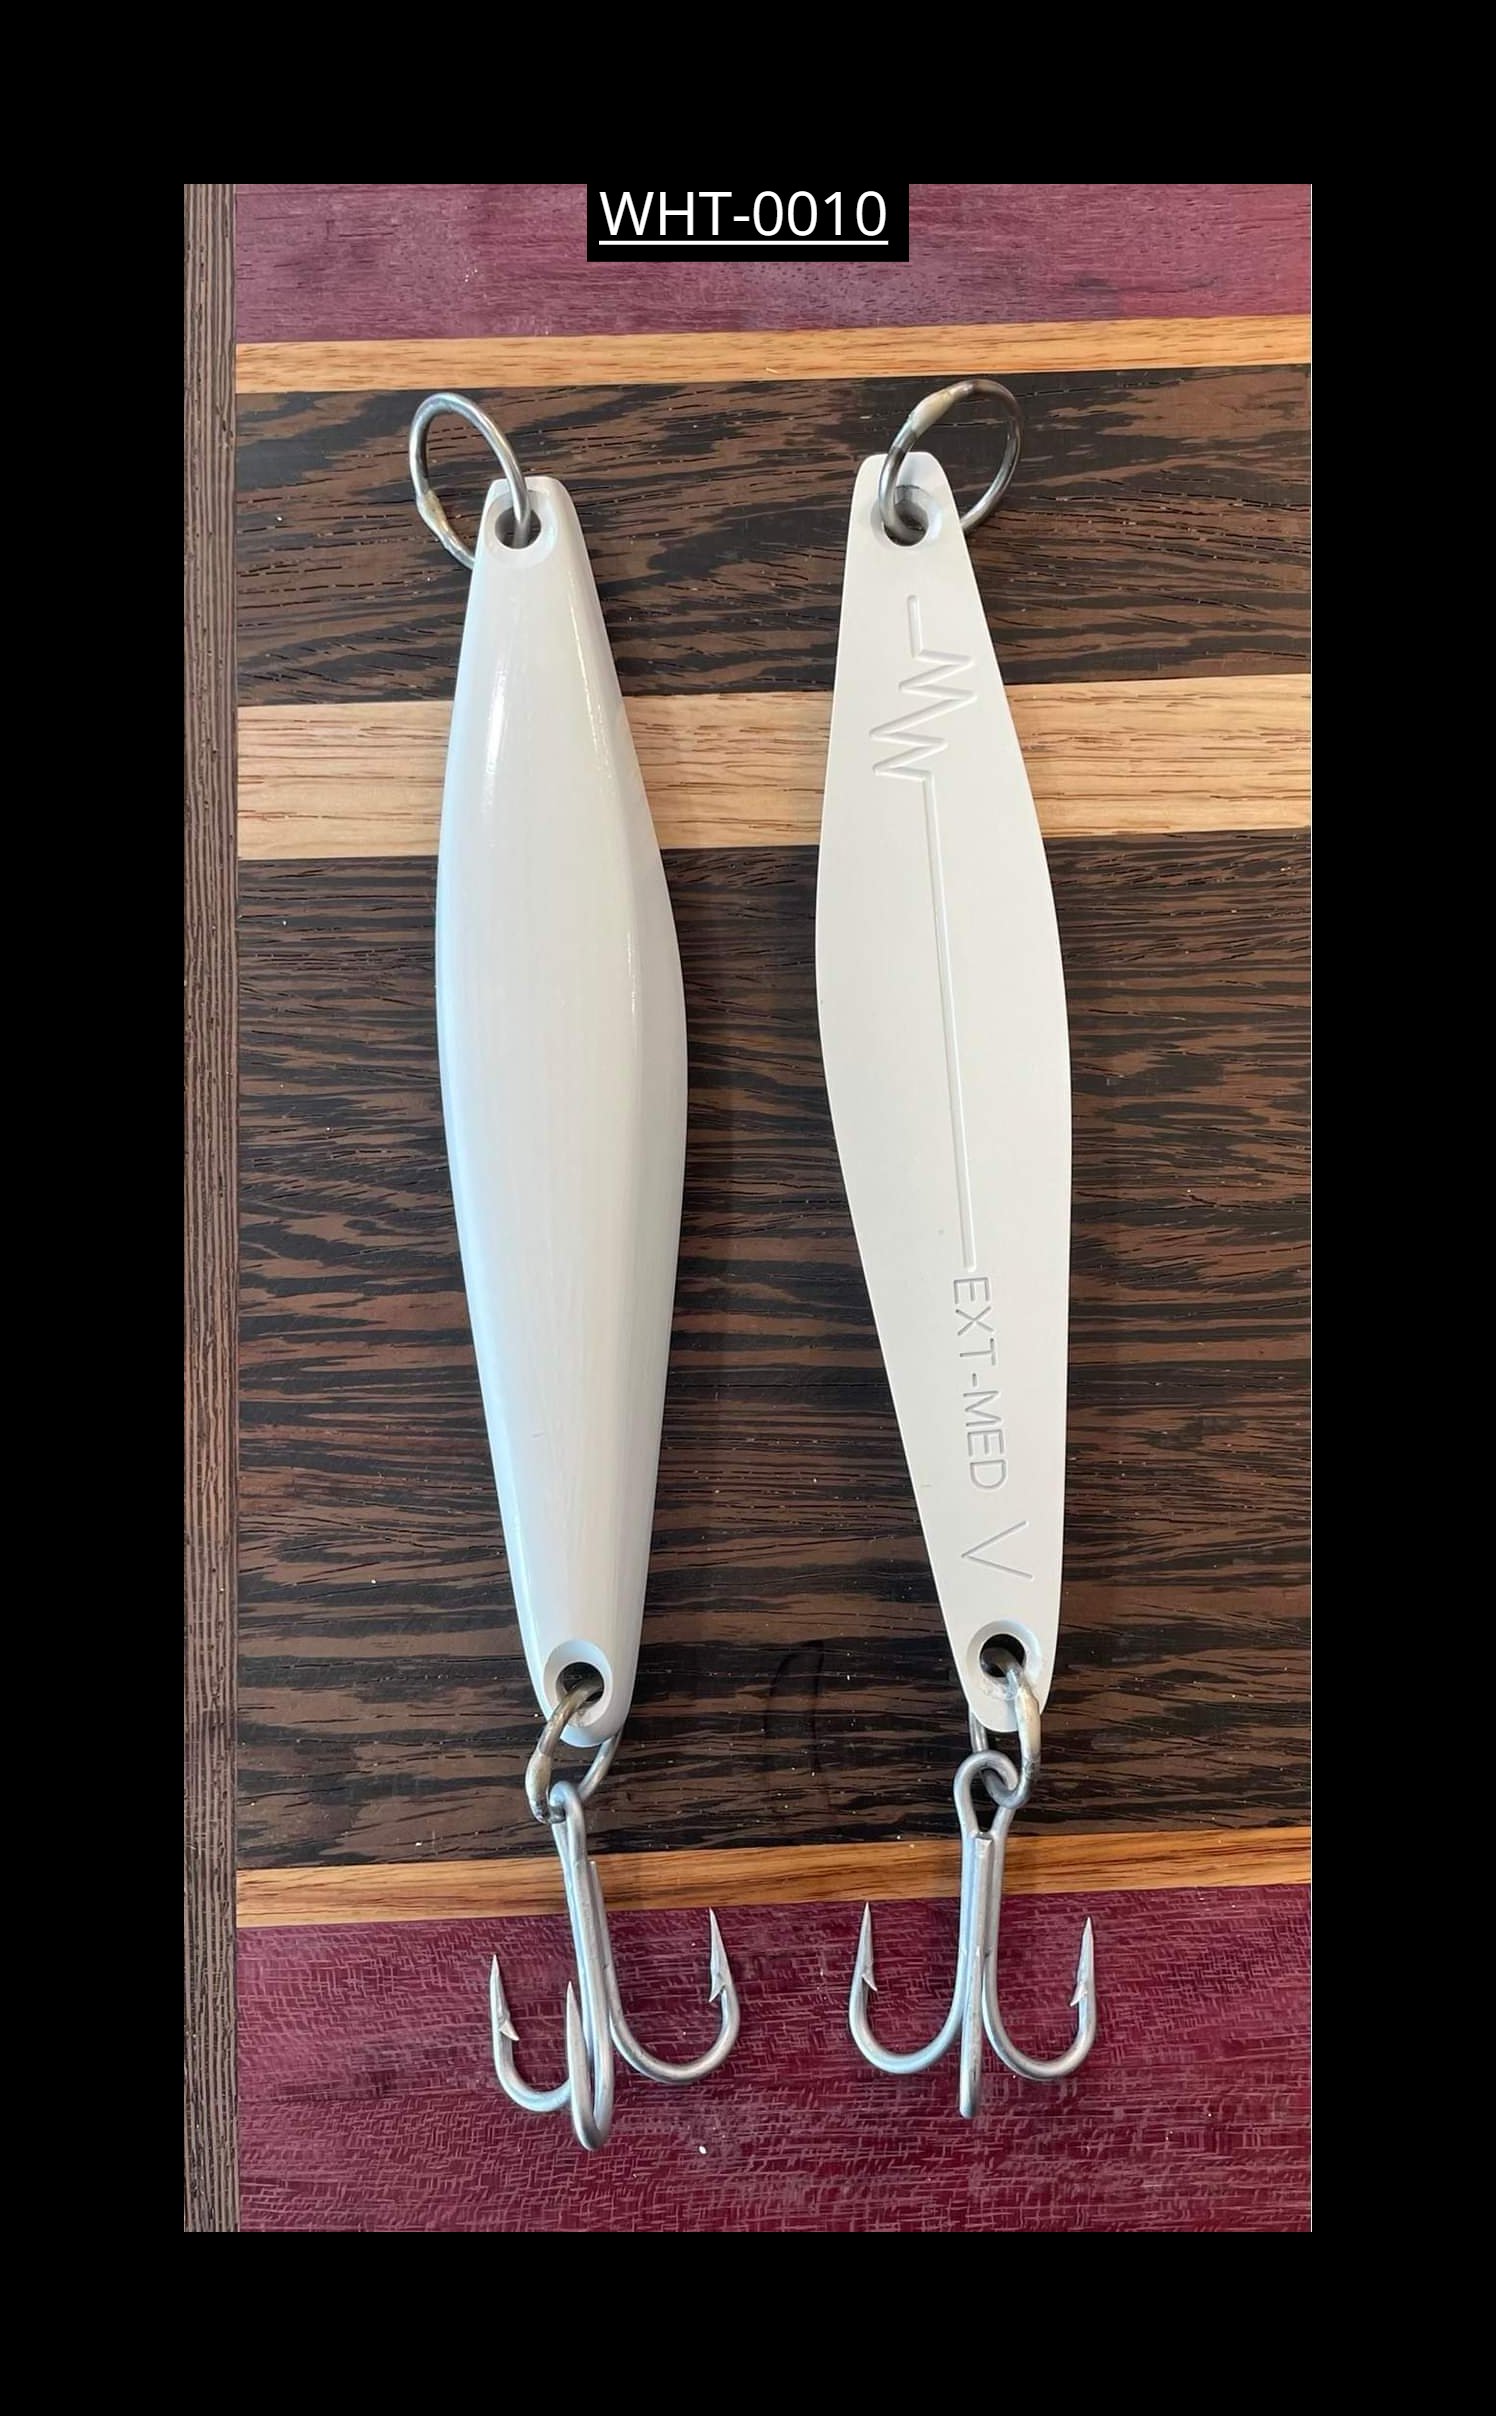 mw lures surface irons — mwlures